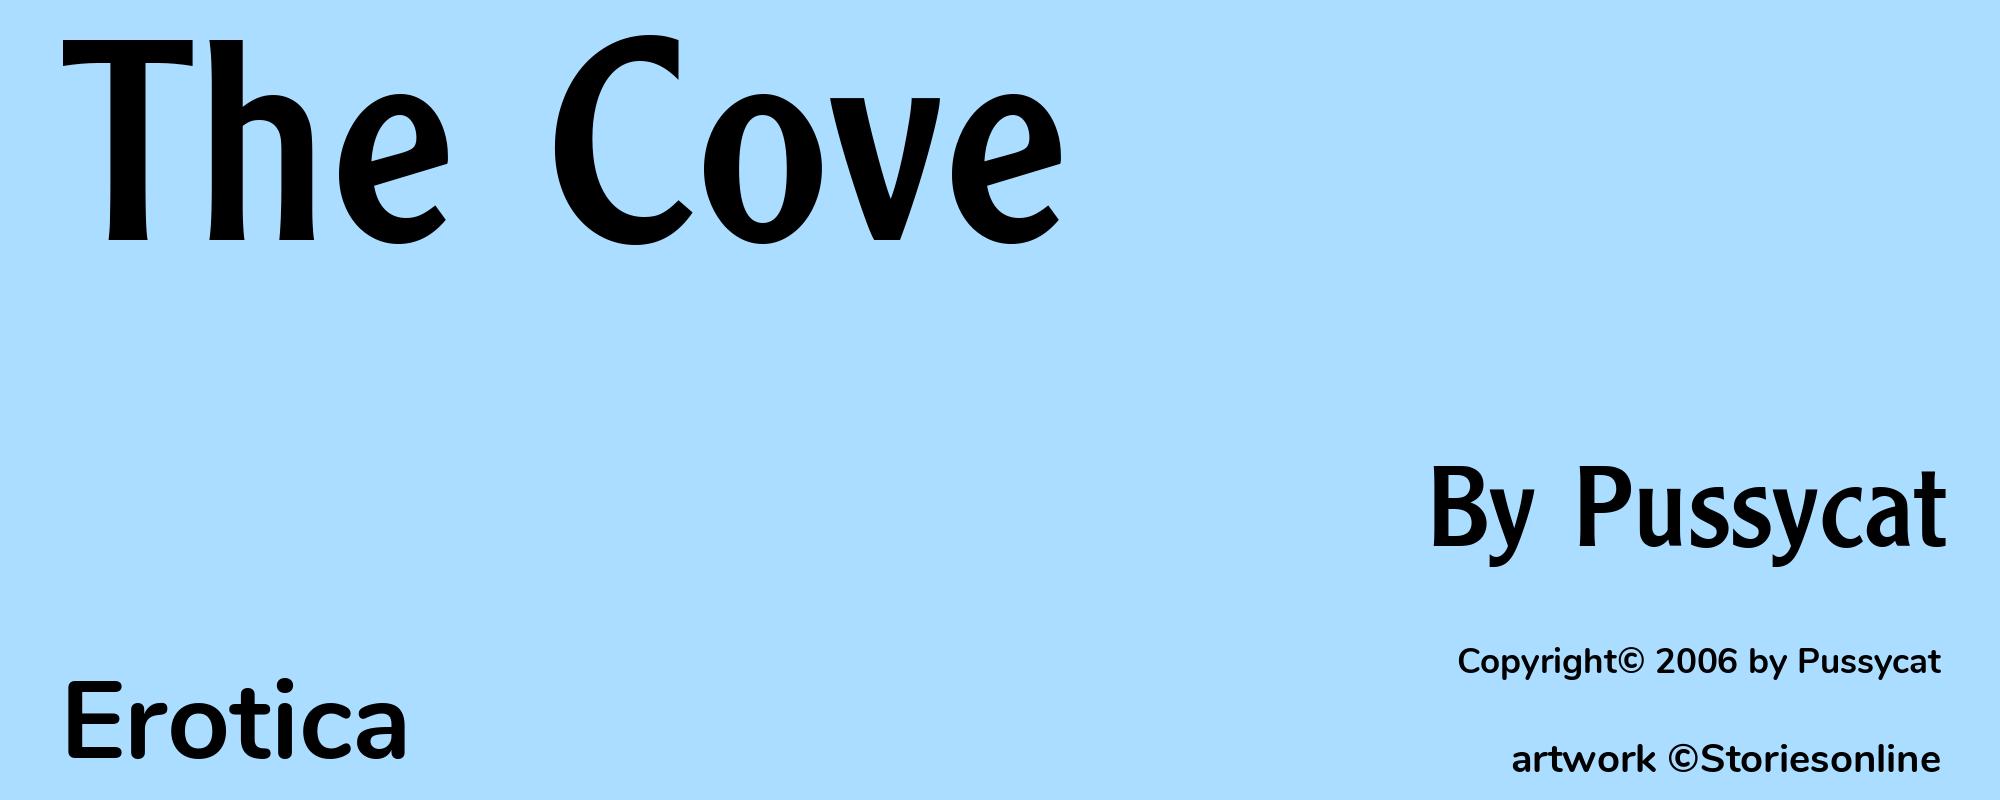 The Cove - Cover